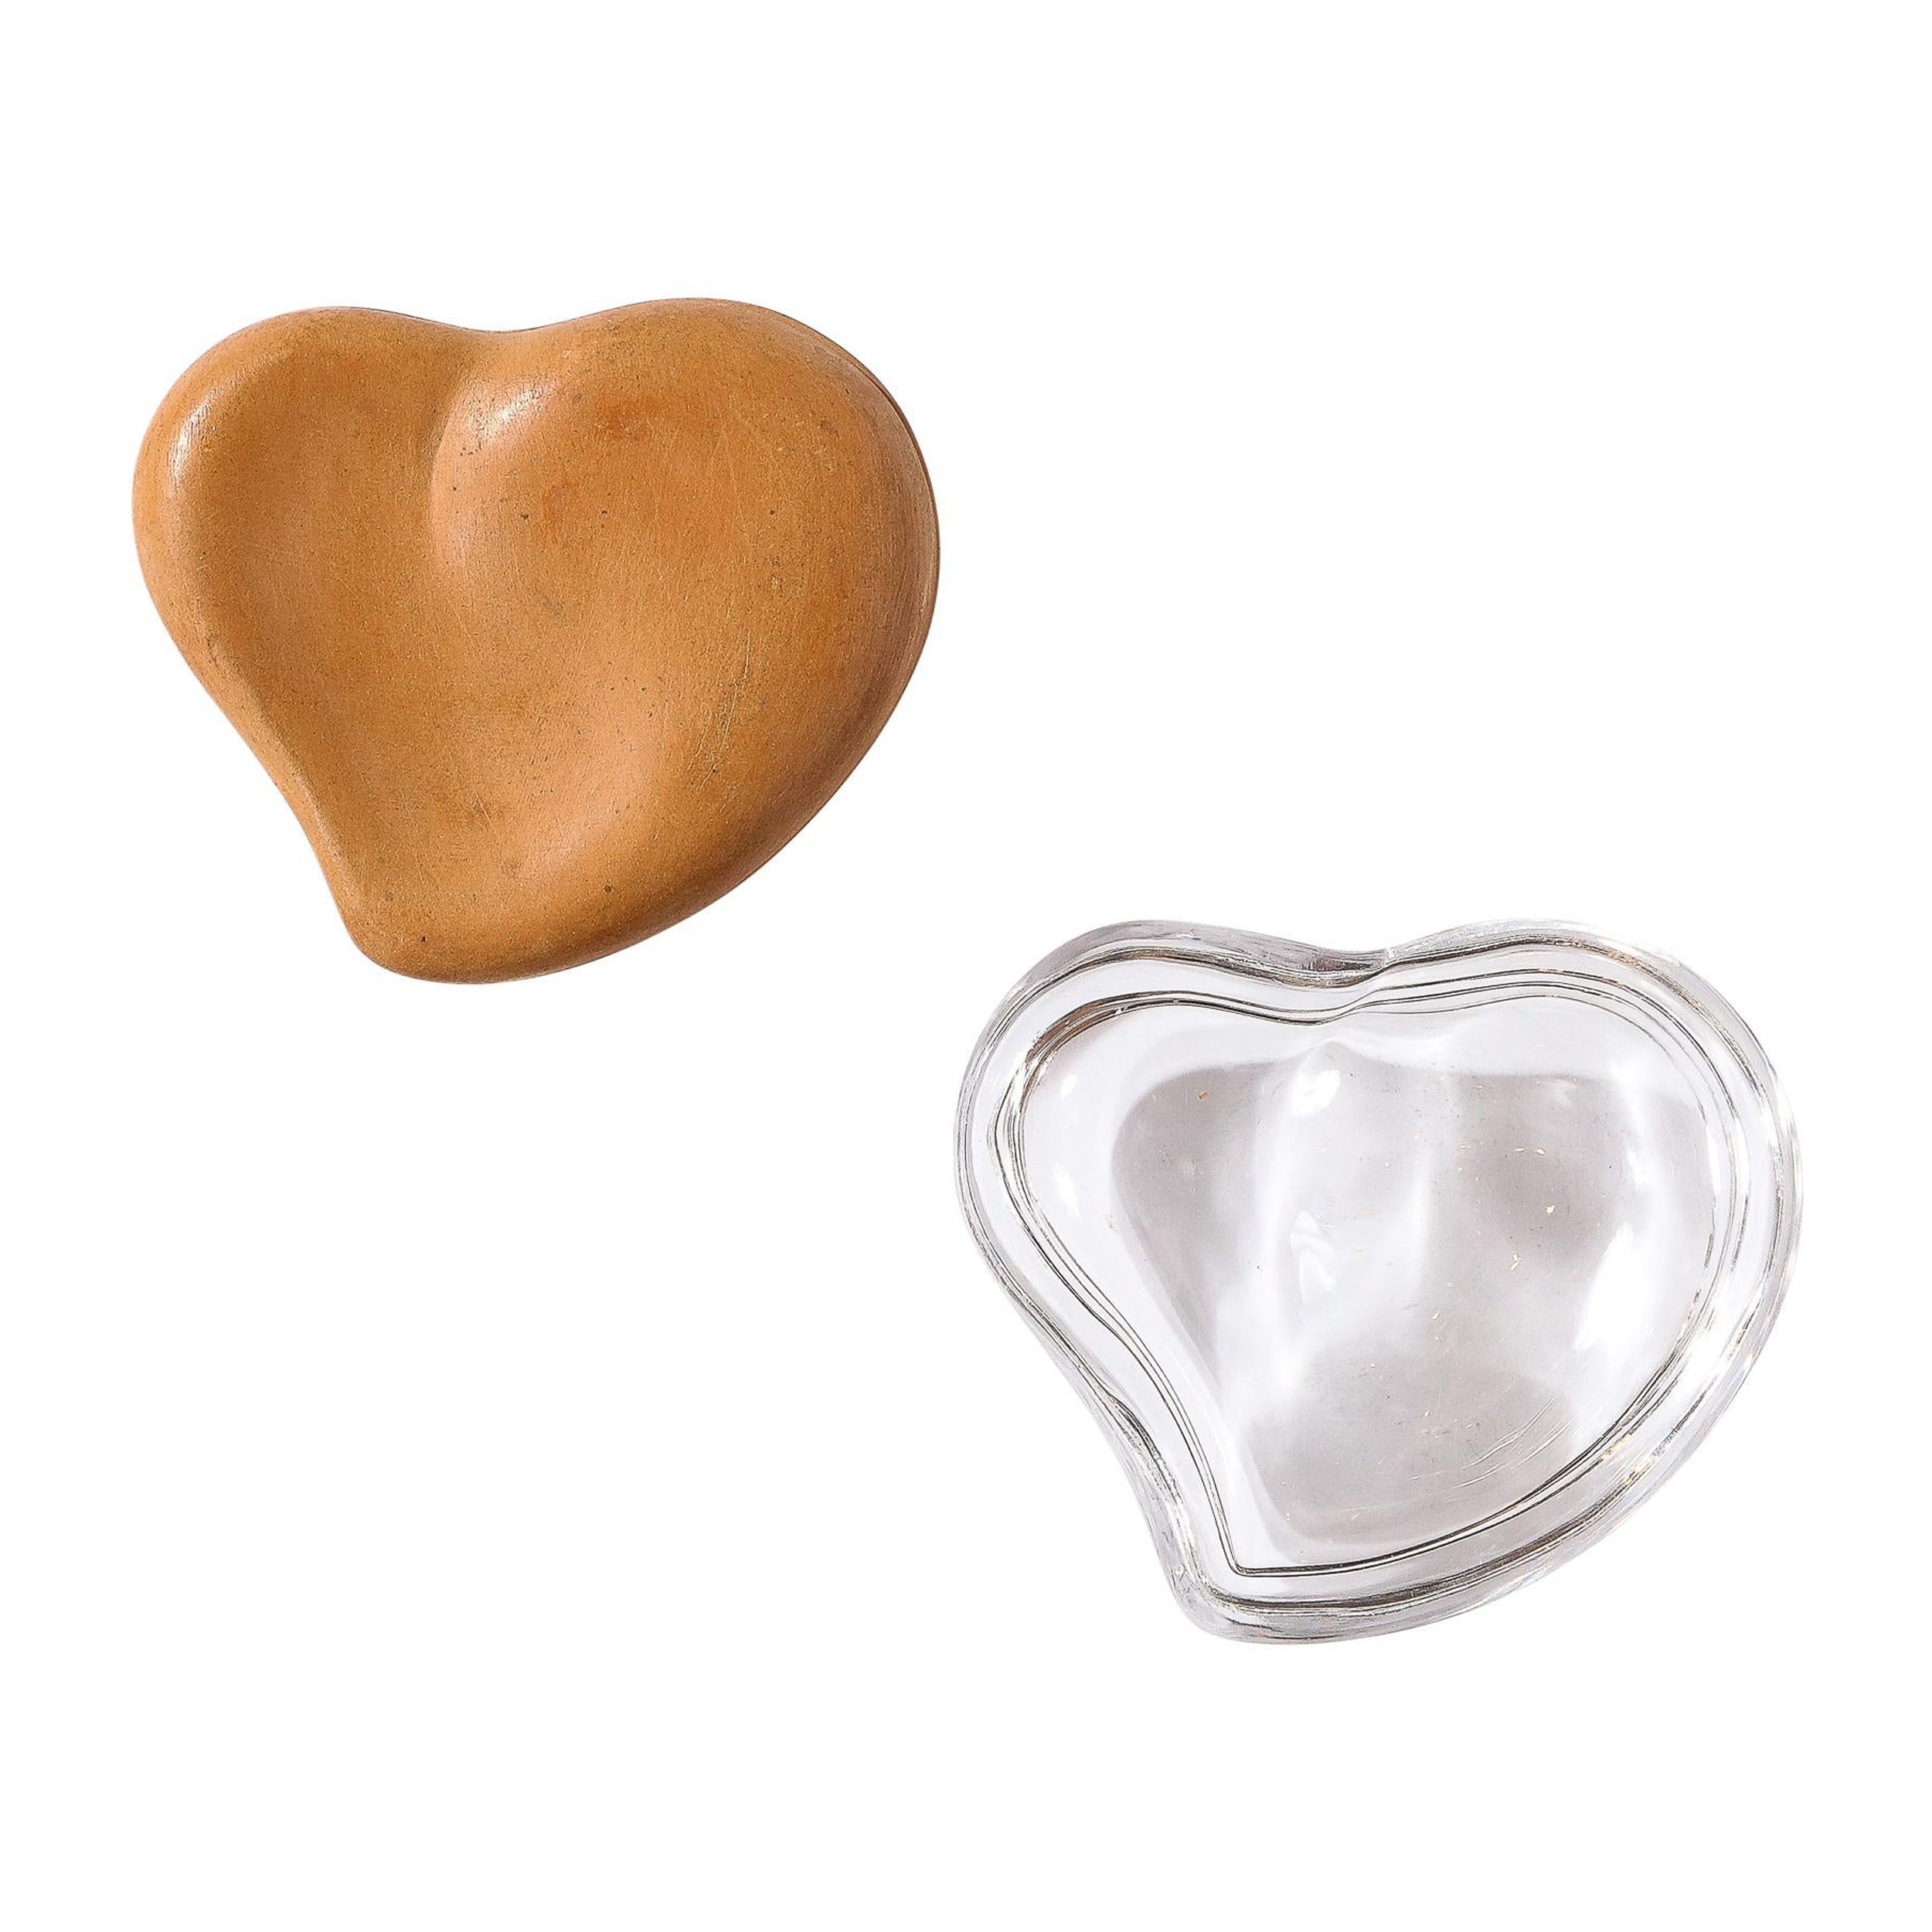 Heart Form Glass & Terra Cotta Trinket Boxes by Elsa Peretti for Tiffany & Co.